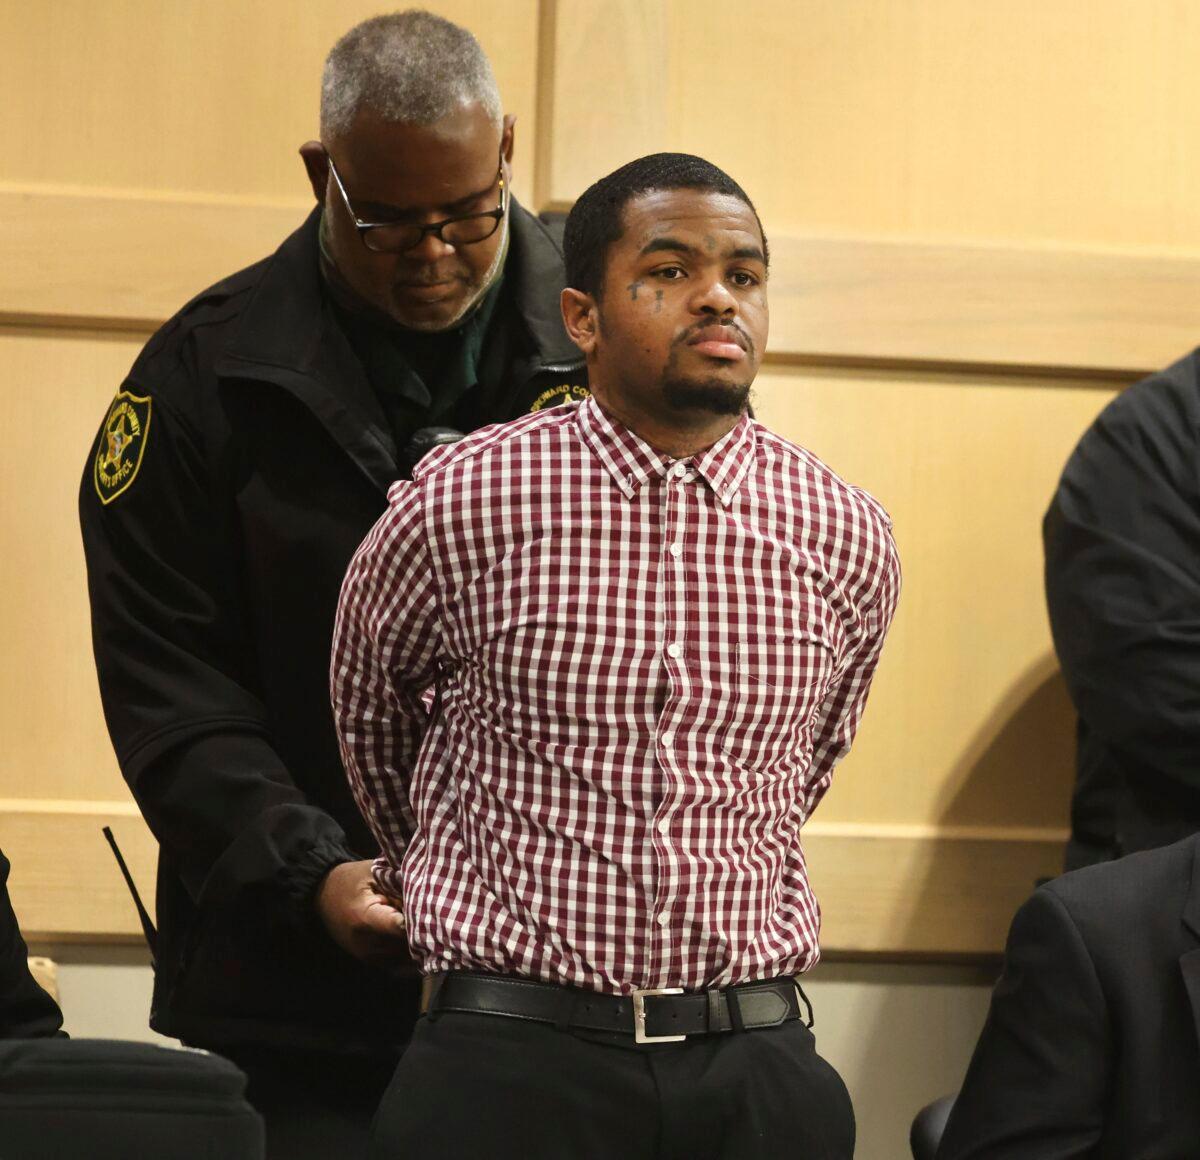 Dedrick Williams is handcuffed after he was found guilty of first-degree murder of emerging rapper XXXTentacion at the Broward County Courthouse in Fort Lauderdale, Fla., on March 20, 2023. (Carline Jean/South Florida Sun-Sentinel via AP, Pool)